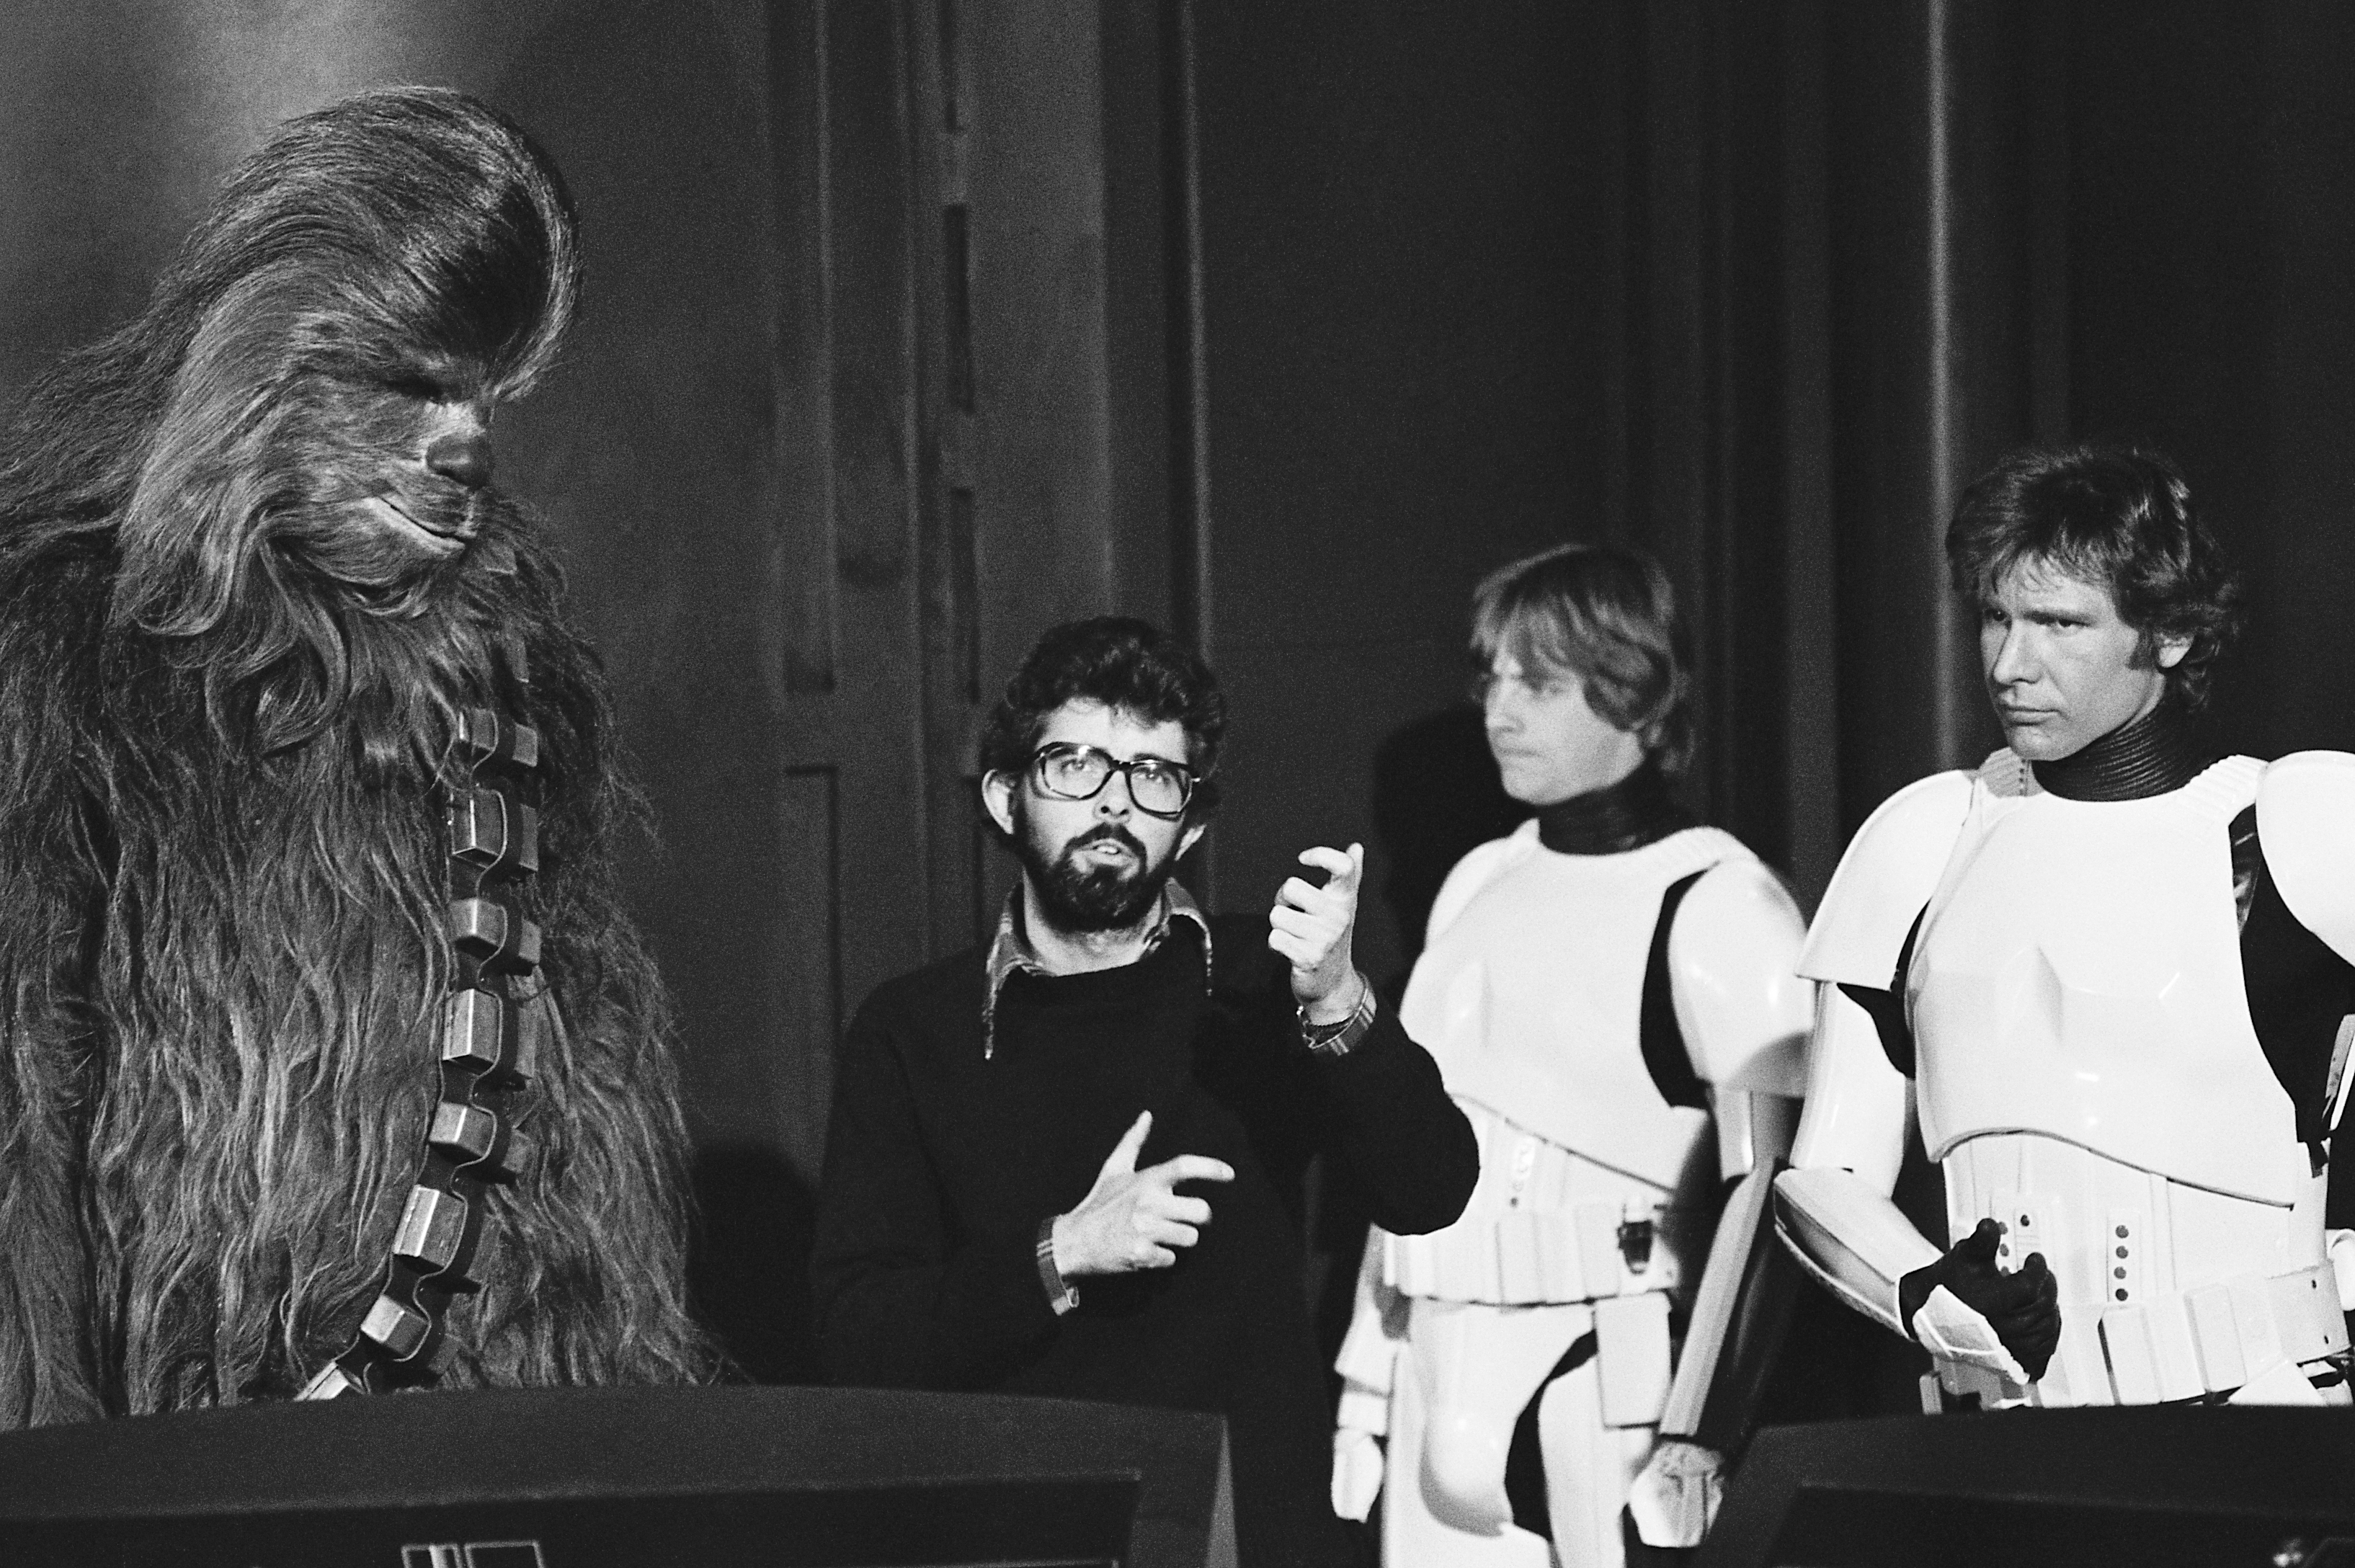 Lucas with Peter Mayhew (Chewbacca), along with Hamill and Ford on the set of Episode IV. (Zalika Azim)